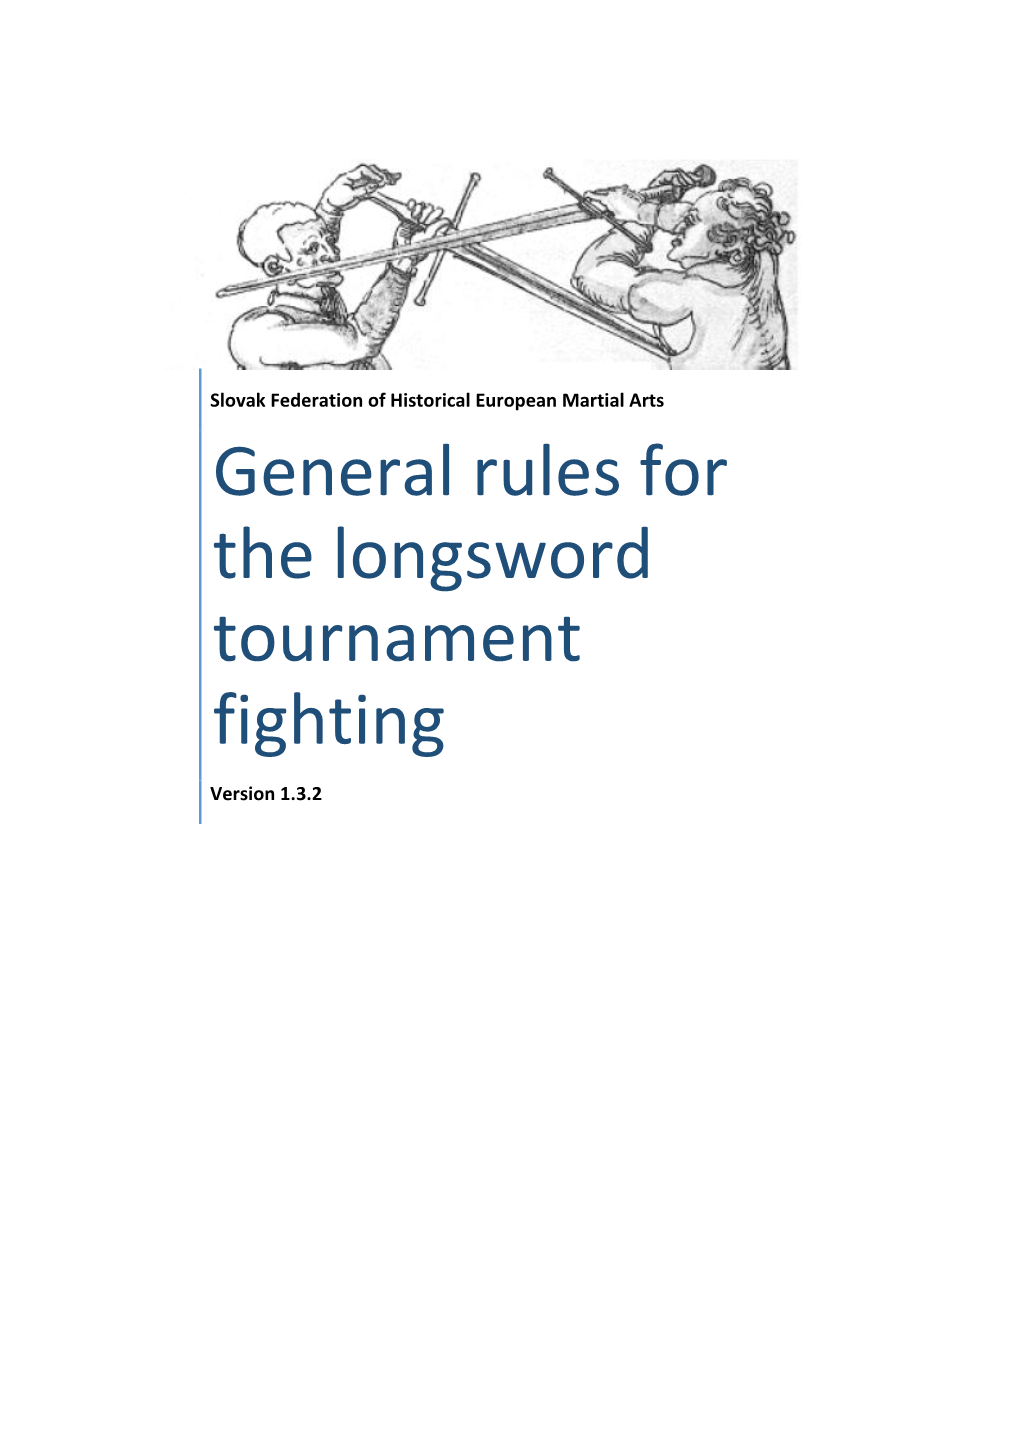 General Rules for the Longsword Tournament Fighting